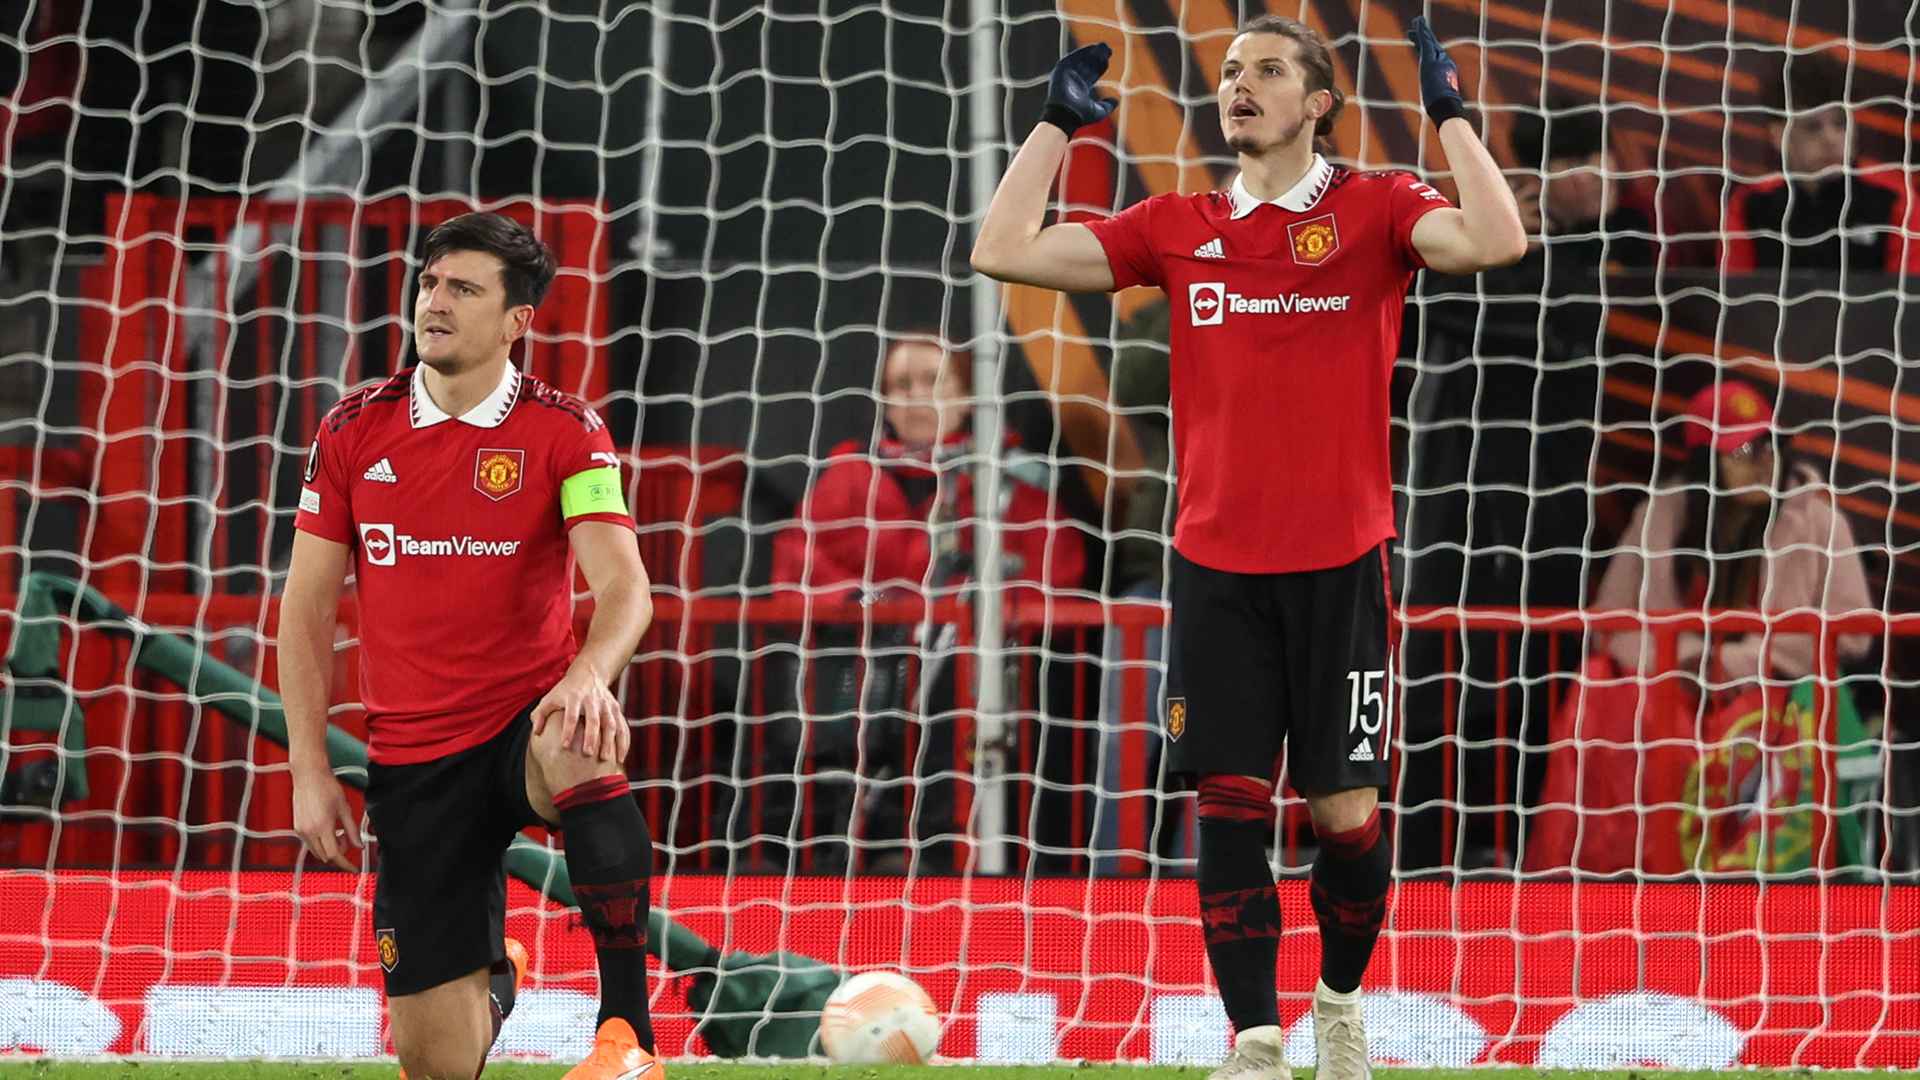 Harry Maguire of Manchester United reacts after scoring an own goal to make it 2-2 during the UEFA Europa League quarterfinal first leg match between Manchester United and Sevilla FC at Old Trafford on April 13, 2023 in Manchester, United Kingdom.